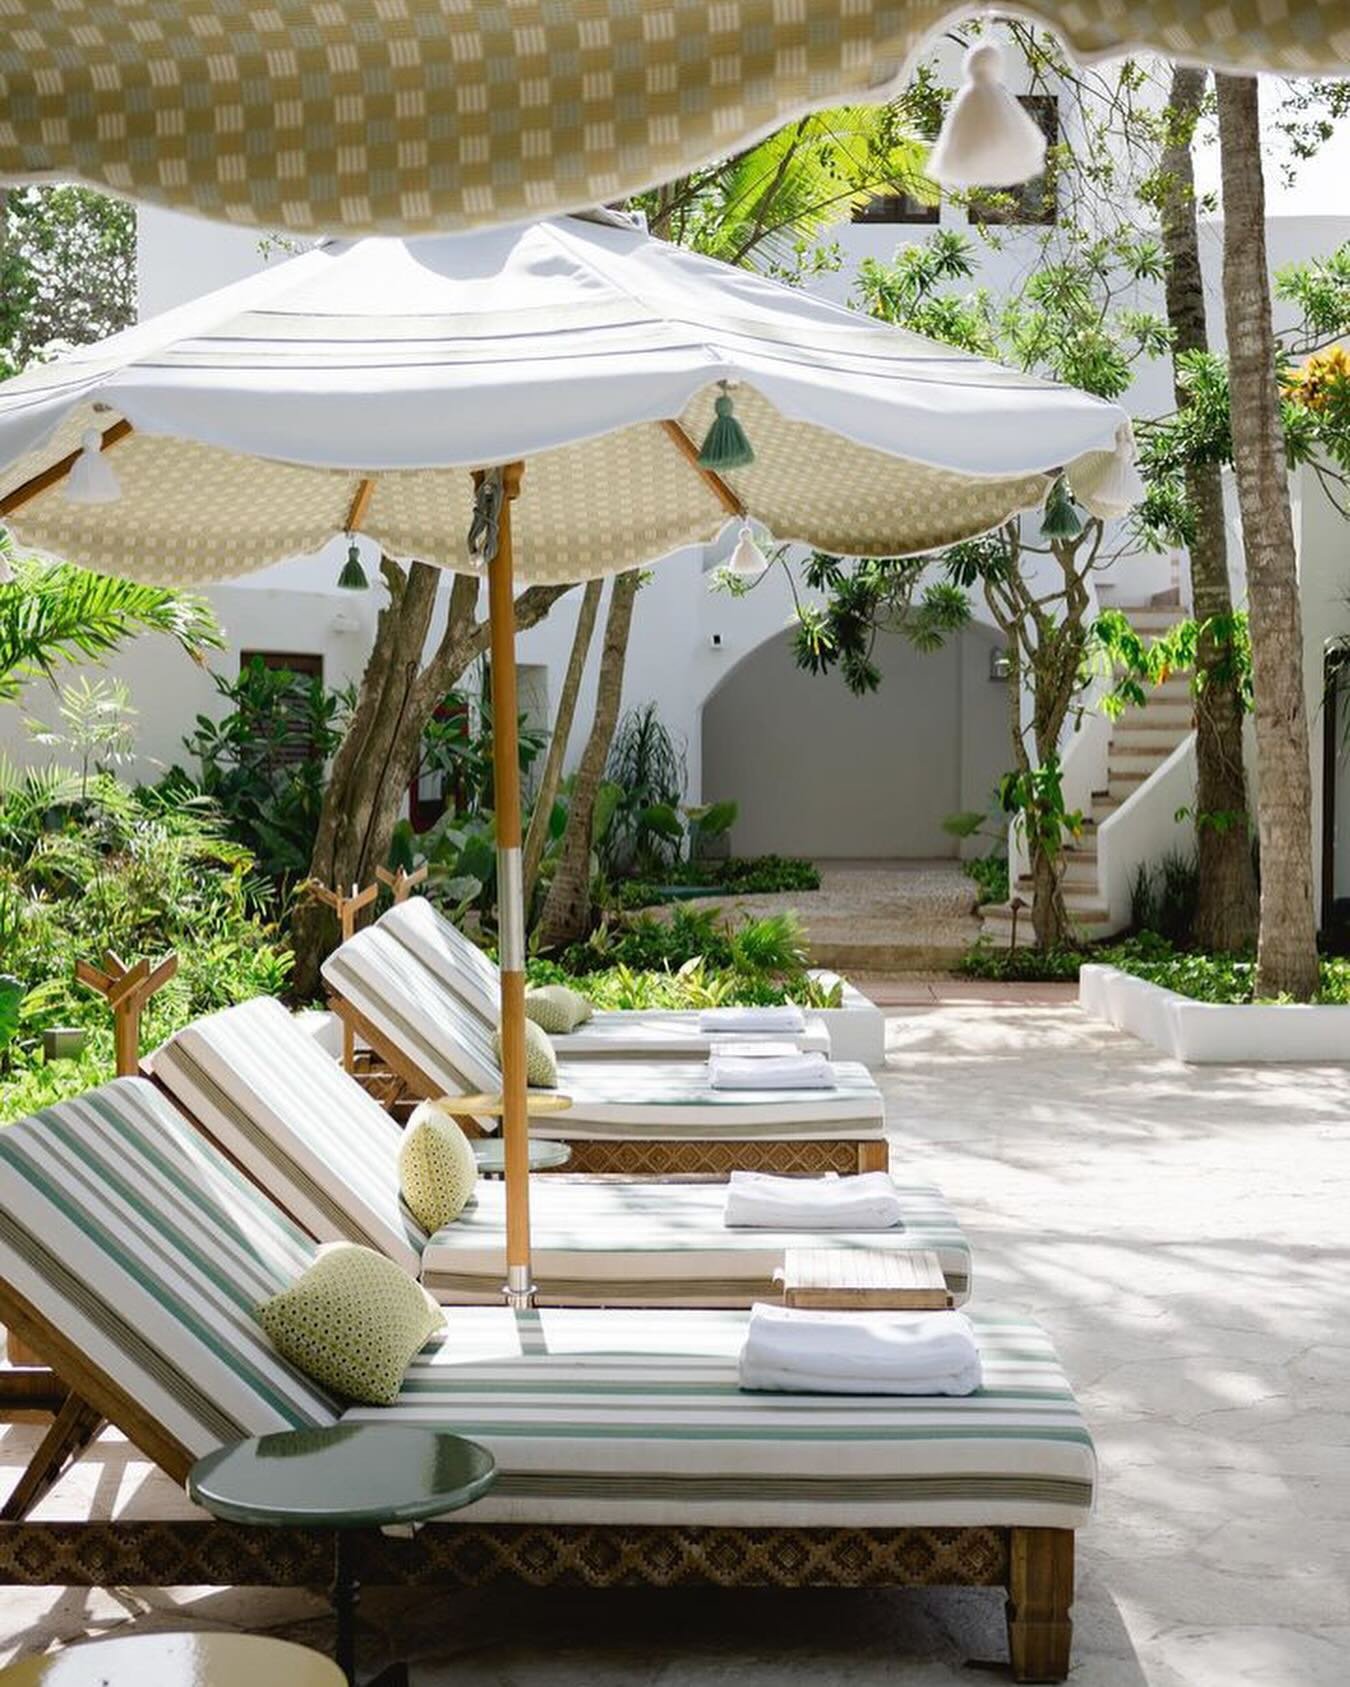 Always seeking the best spots to host wedding weekends for our clients. Like @belmondmaroma and their tranquil charm, warm staff and top-notch hospitality alongside the turquoise ocean in Mexico.
When we visit a property there&rsquo;s a mile long lis